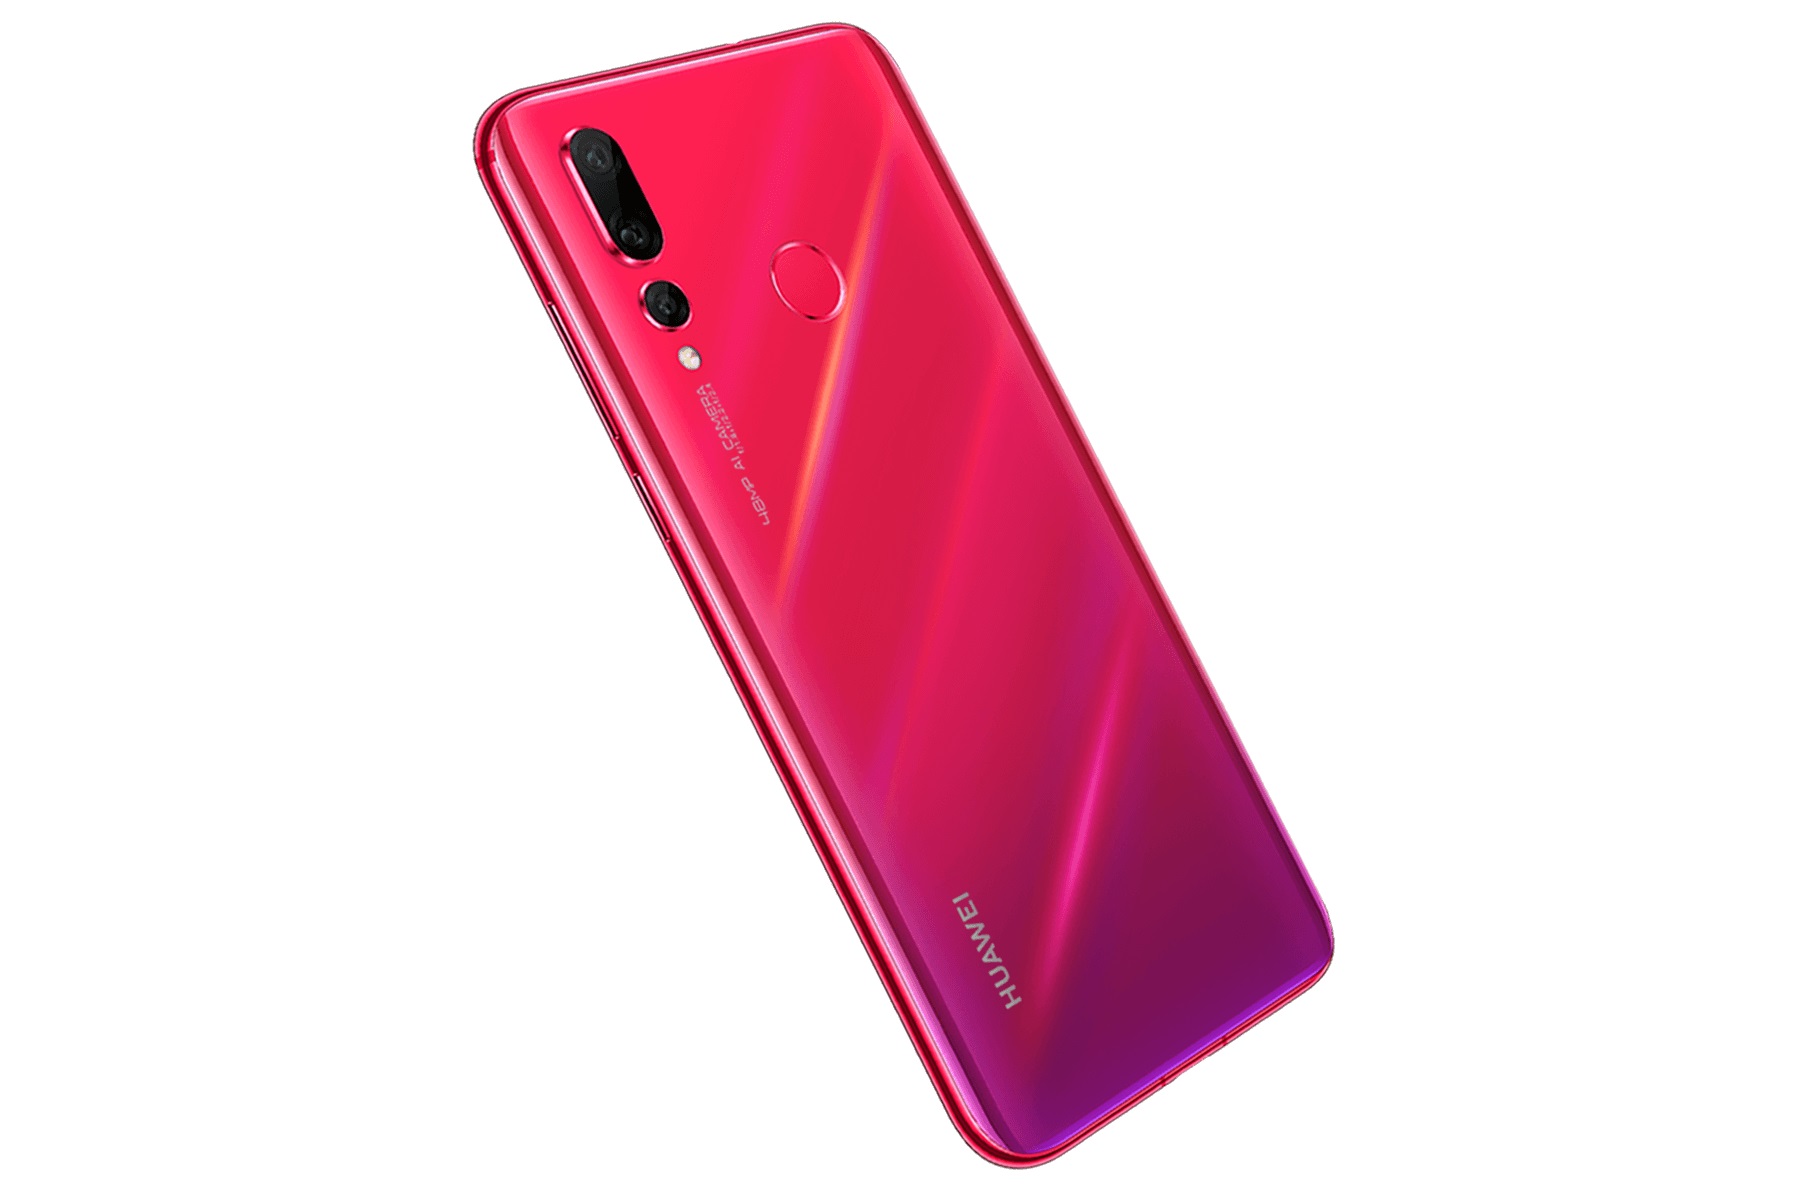 The HUAWEI Nova 4 smartphone in red from behind.